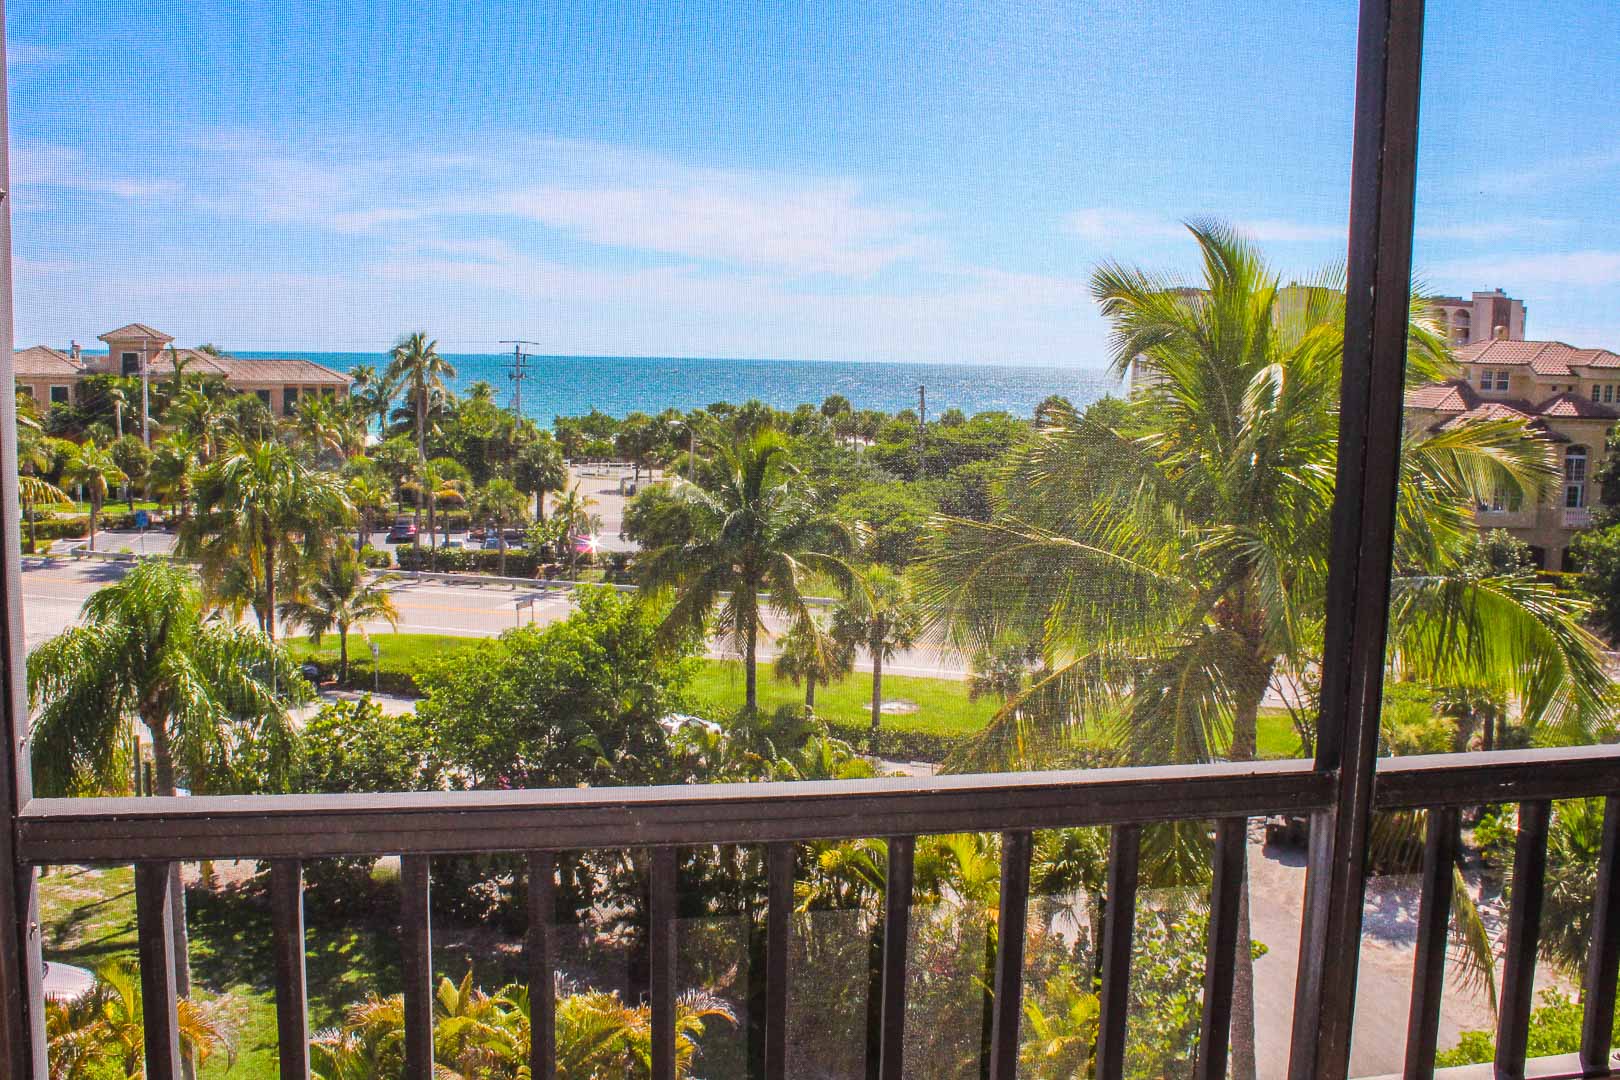 A beautiful beach view from the balcony at VRI's Bonita Resort and Club in Florida.